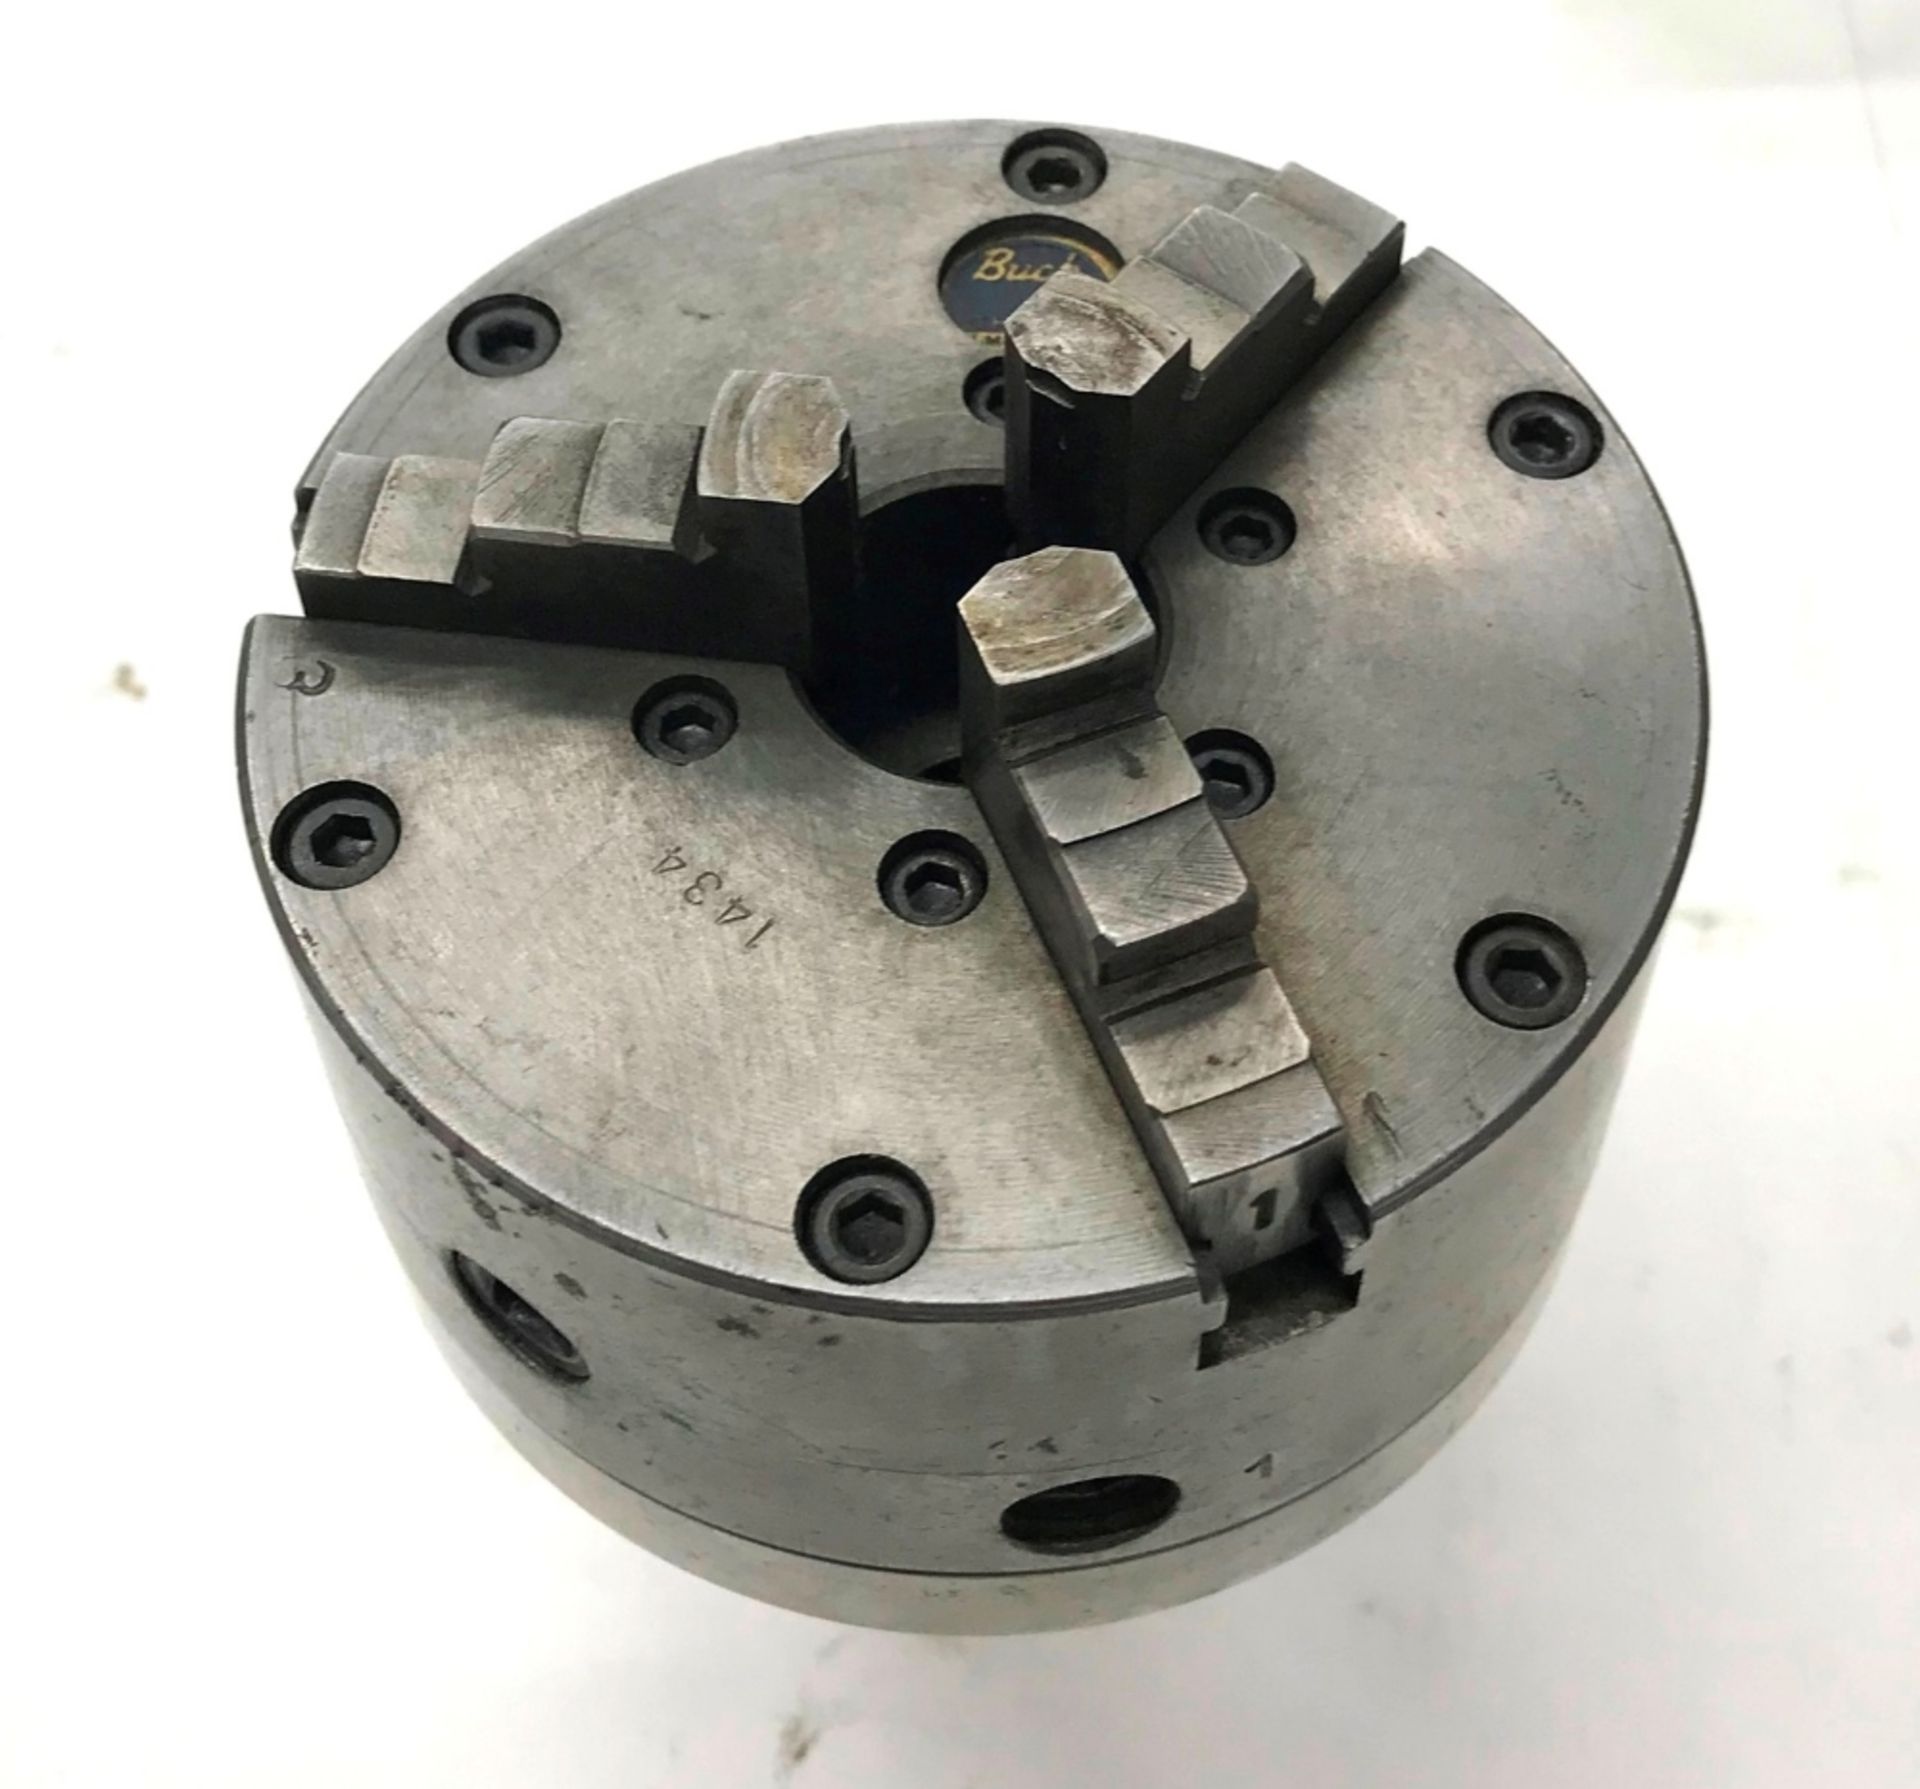 4" Buck Self-Centering 3-Jaw Chuck w/ 6K Collet Back Plate & Asst. 6K Collets - Image 3 of 4